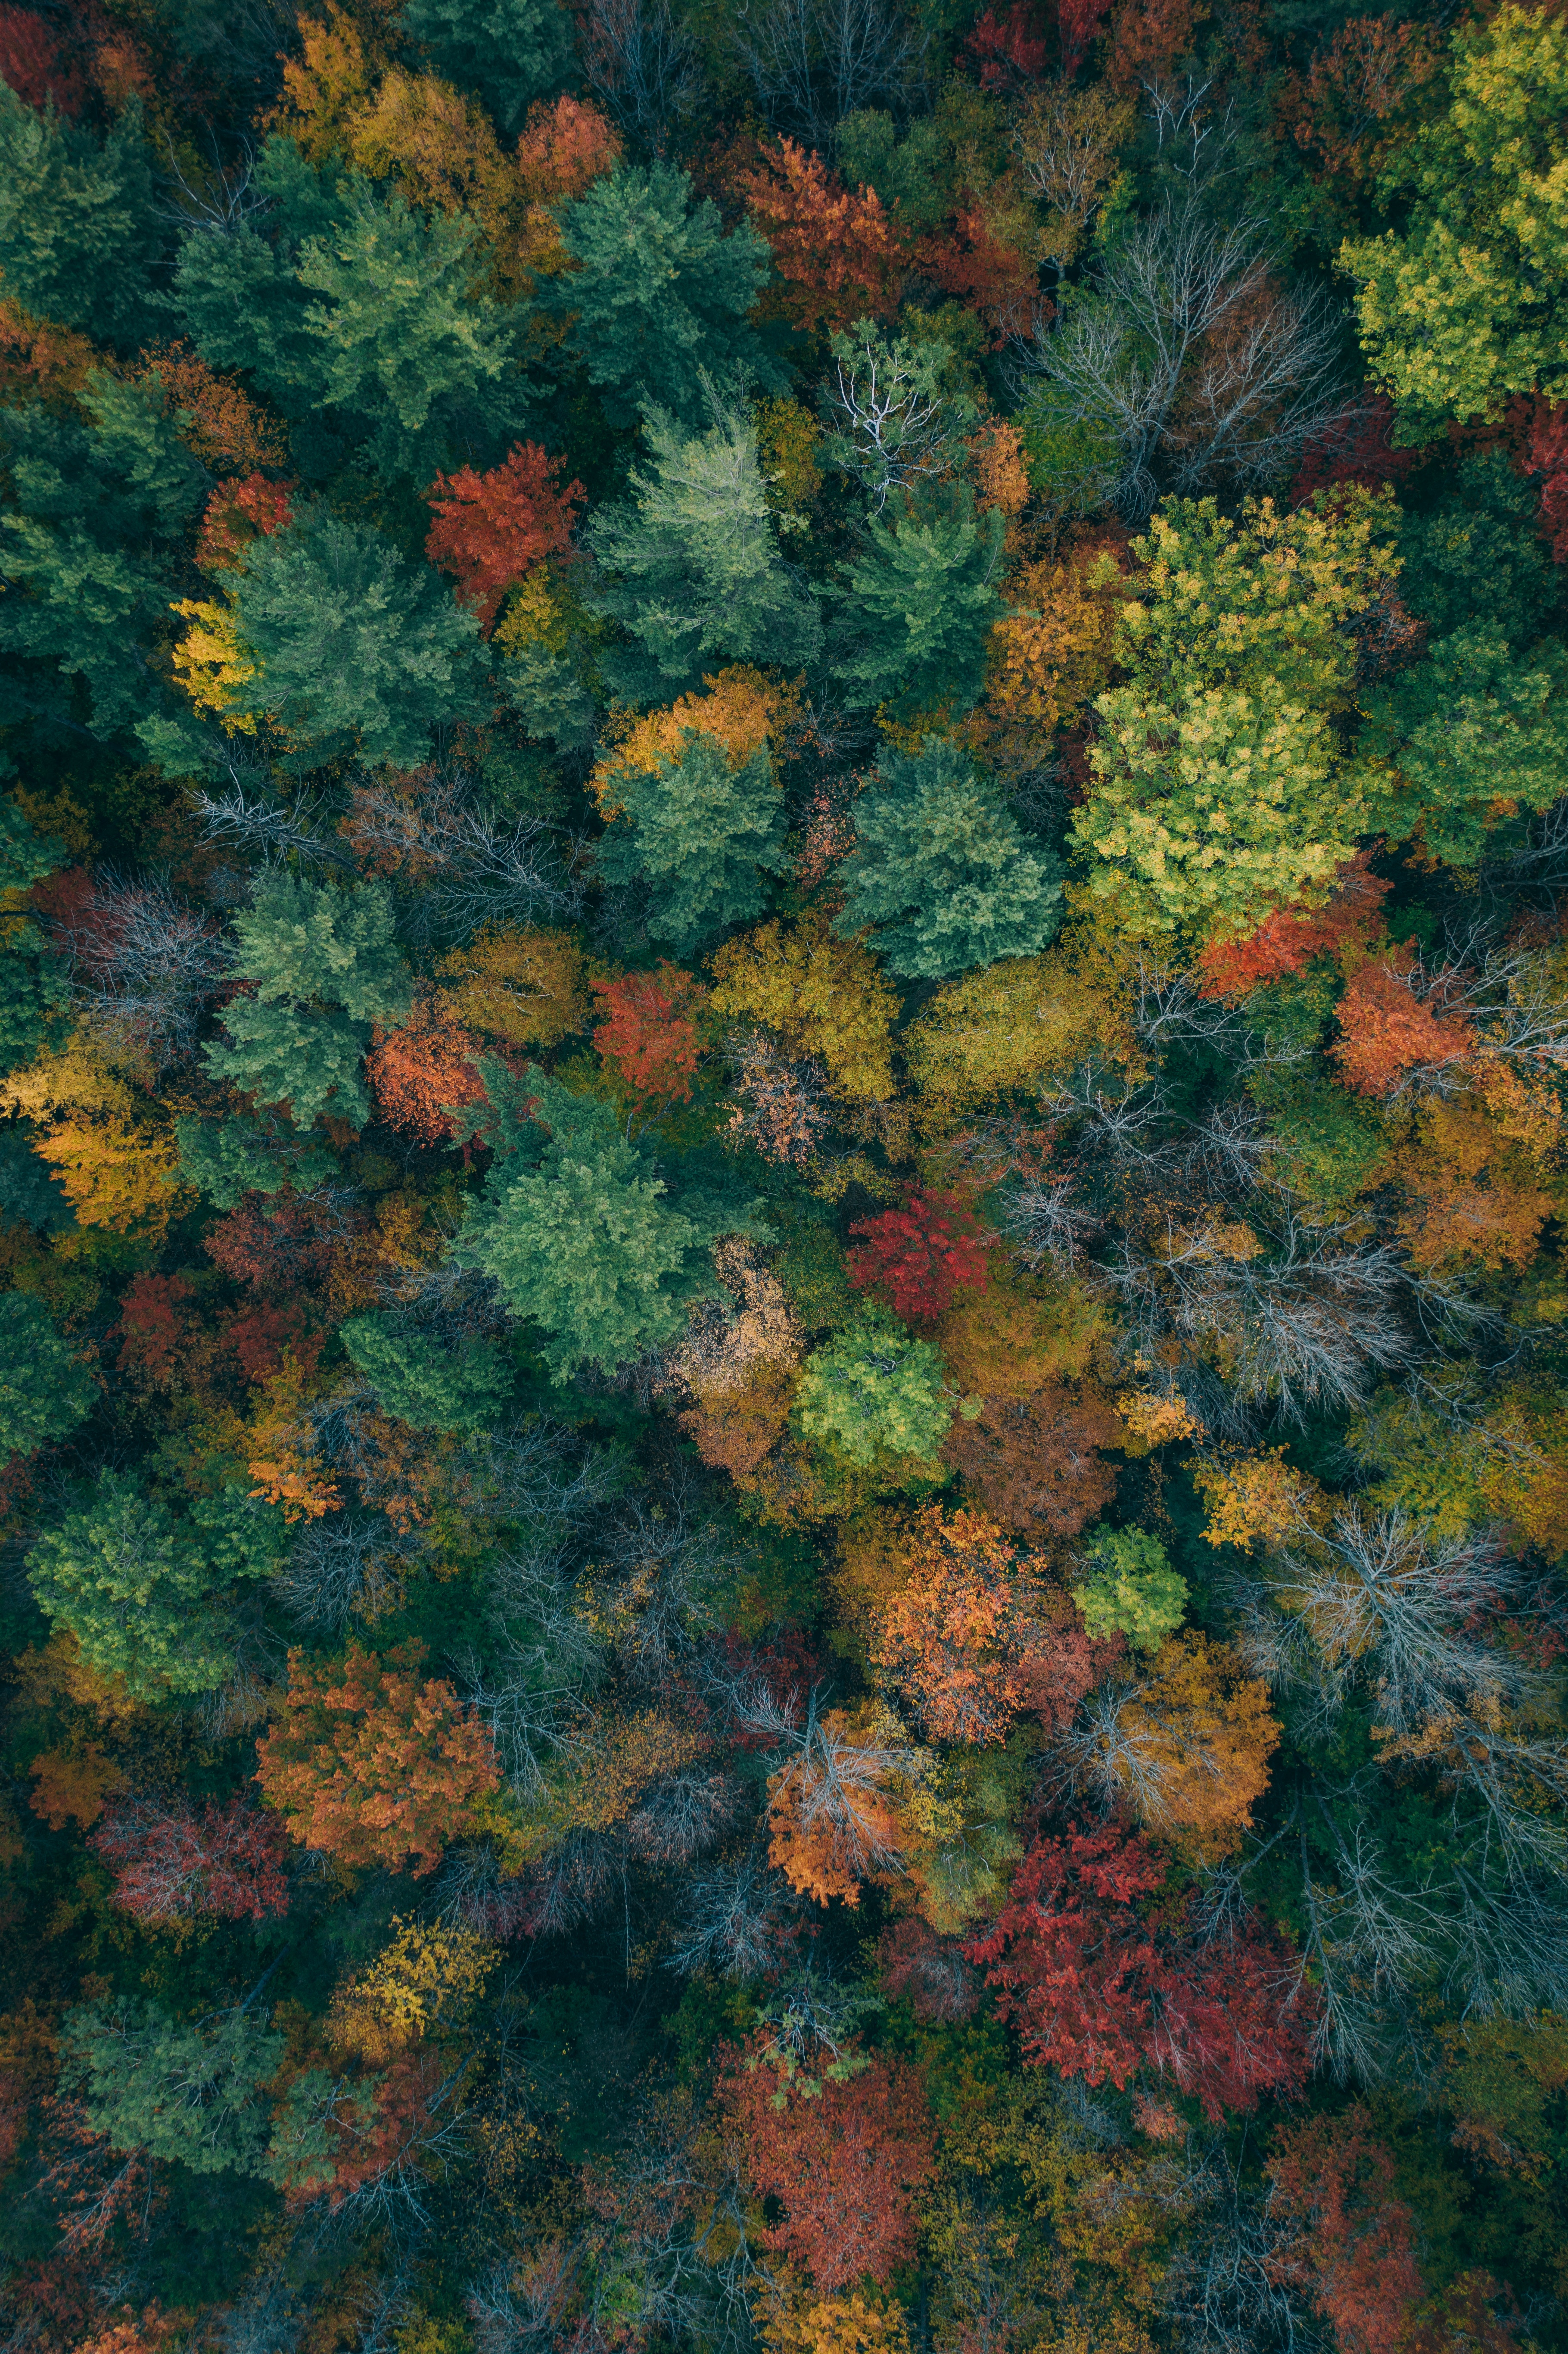 forest, colorful, nature, autumn paints, autumn colors, autumn, trees, view from above, colourful